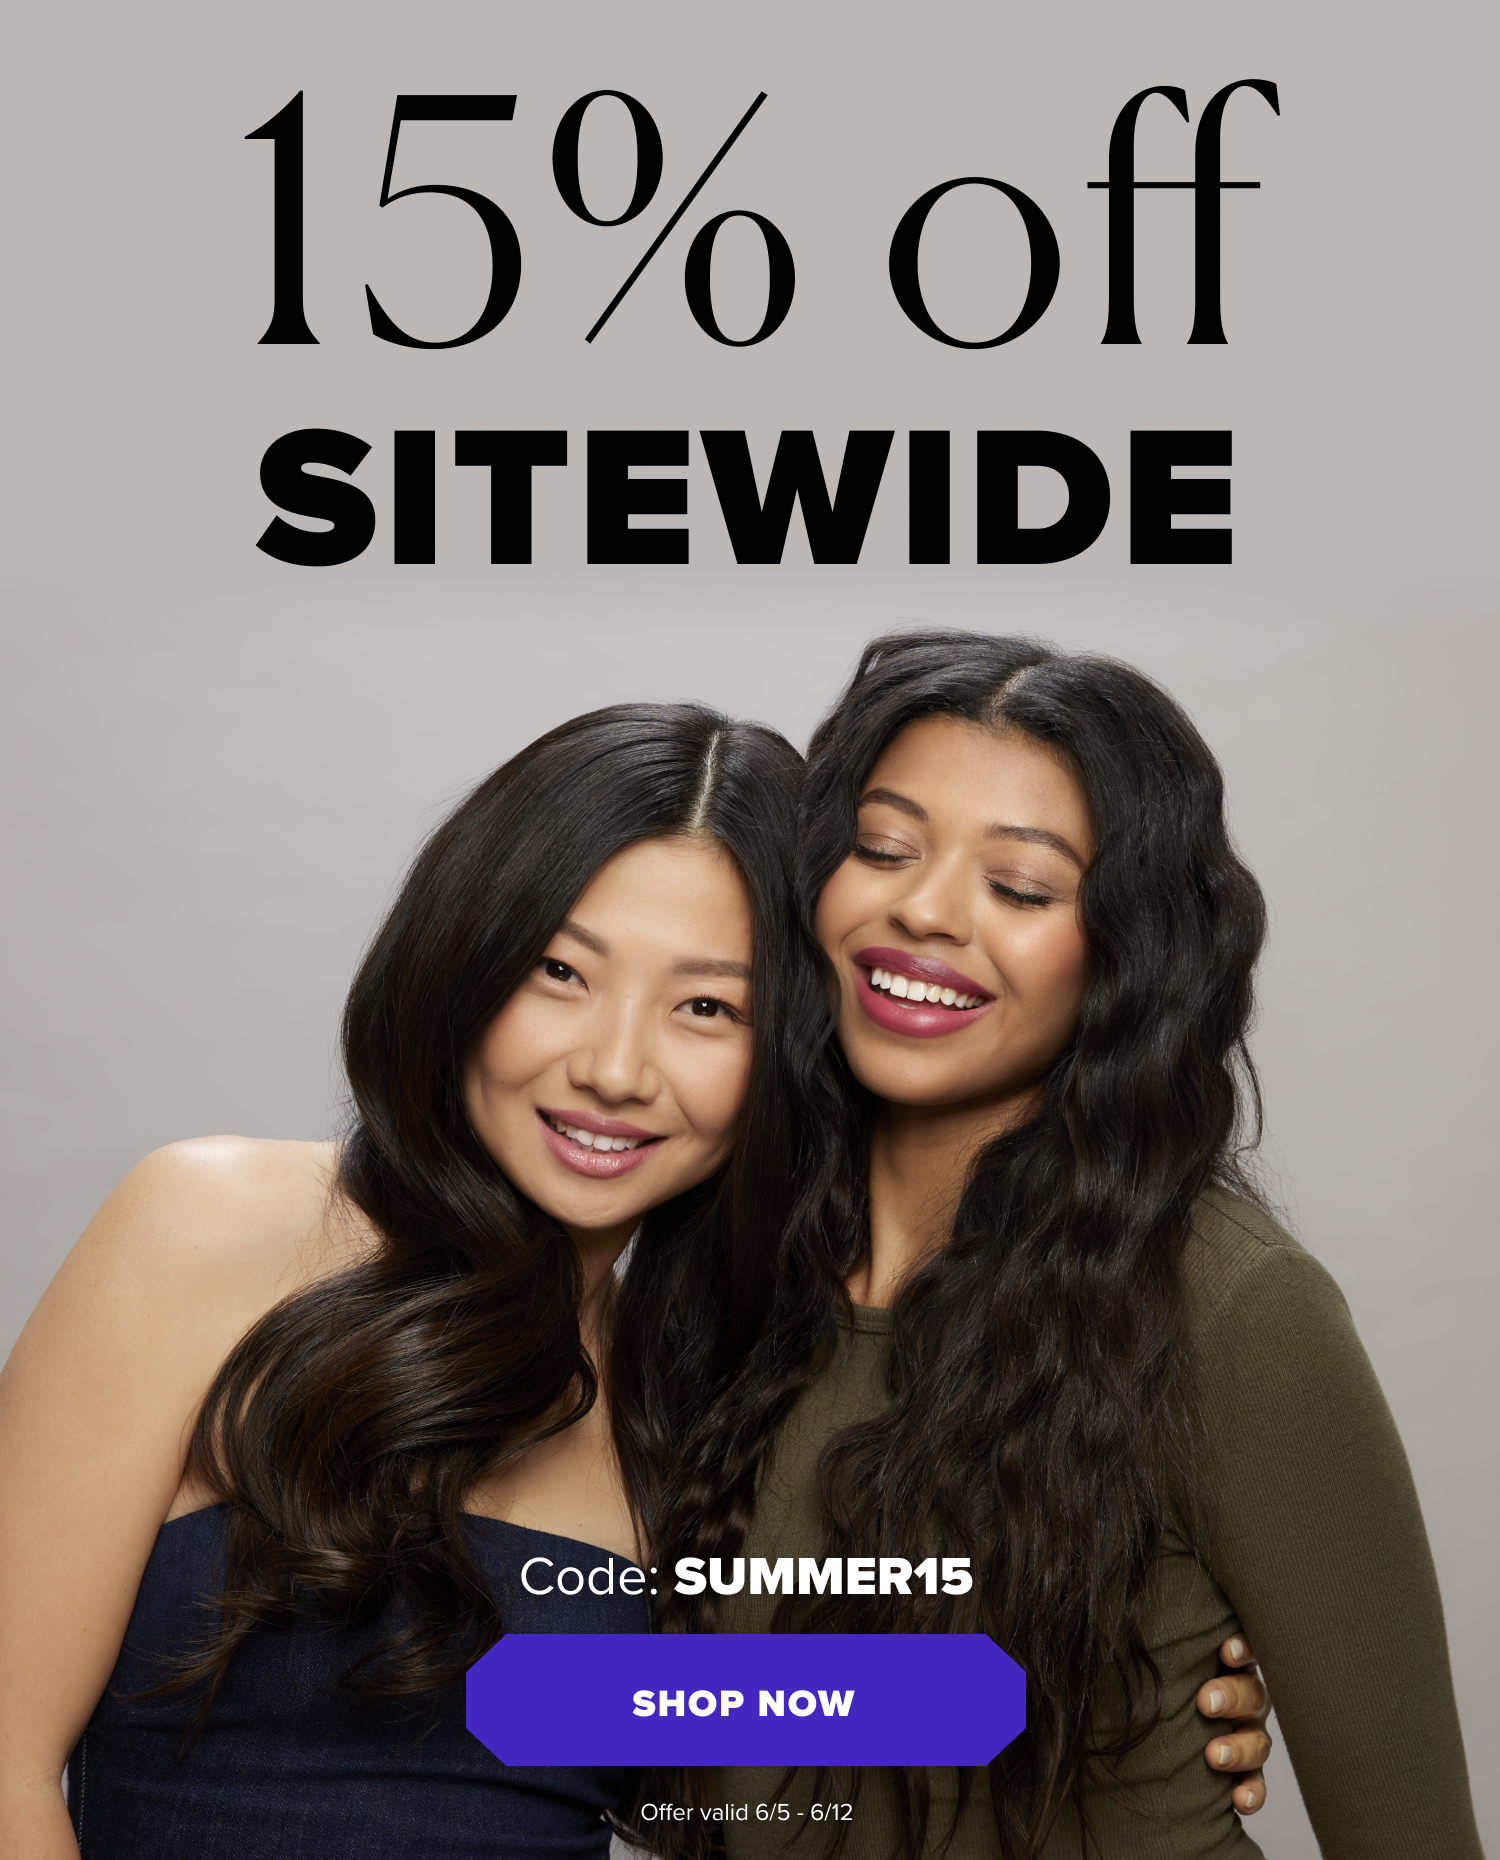 15% Off Sitewide. Code SUMMER15. Shop Now.